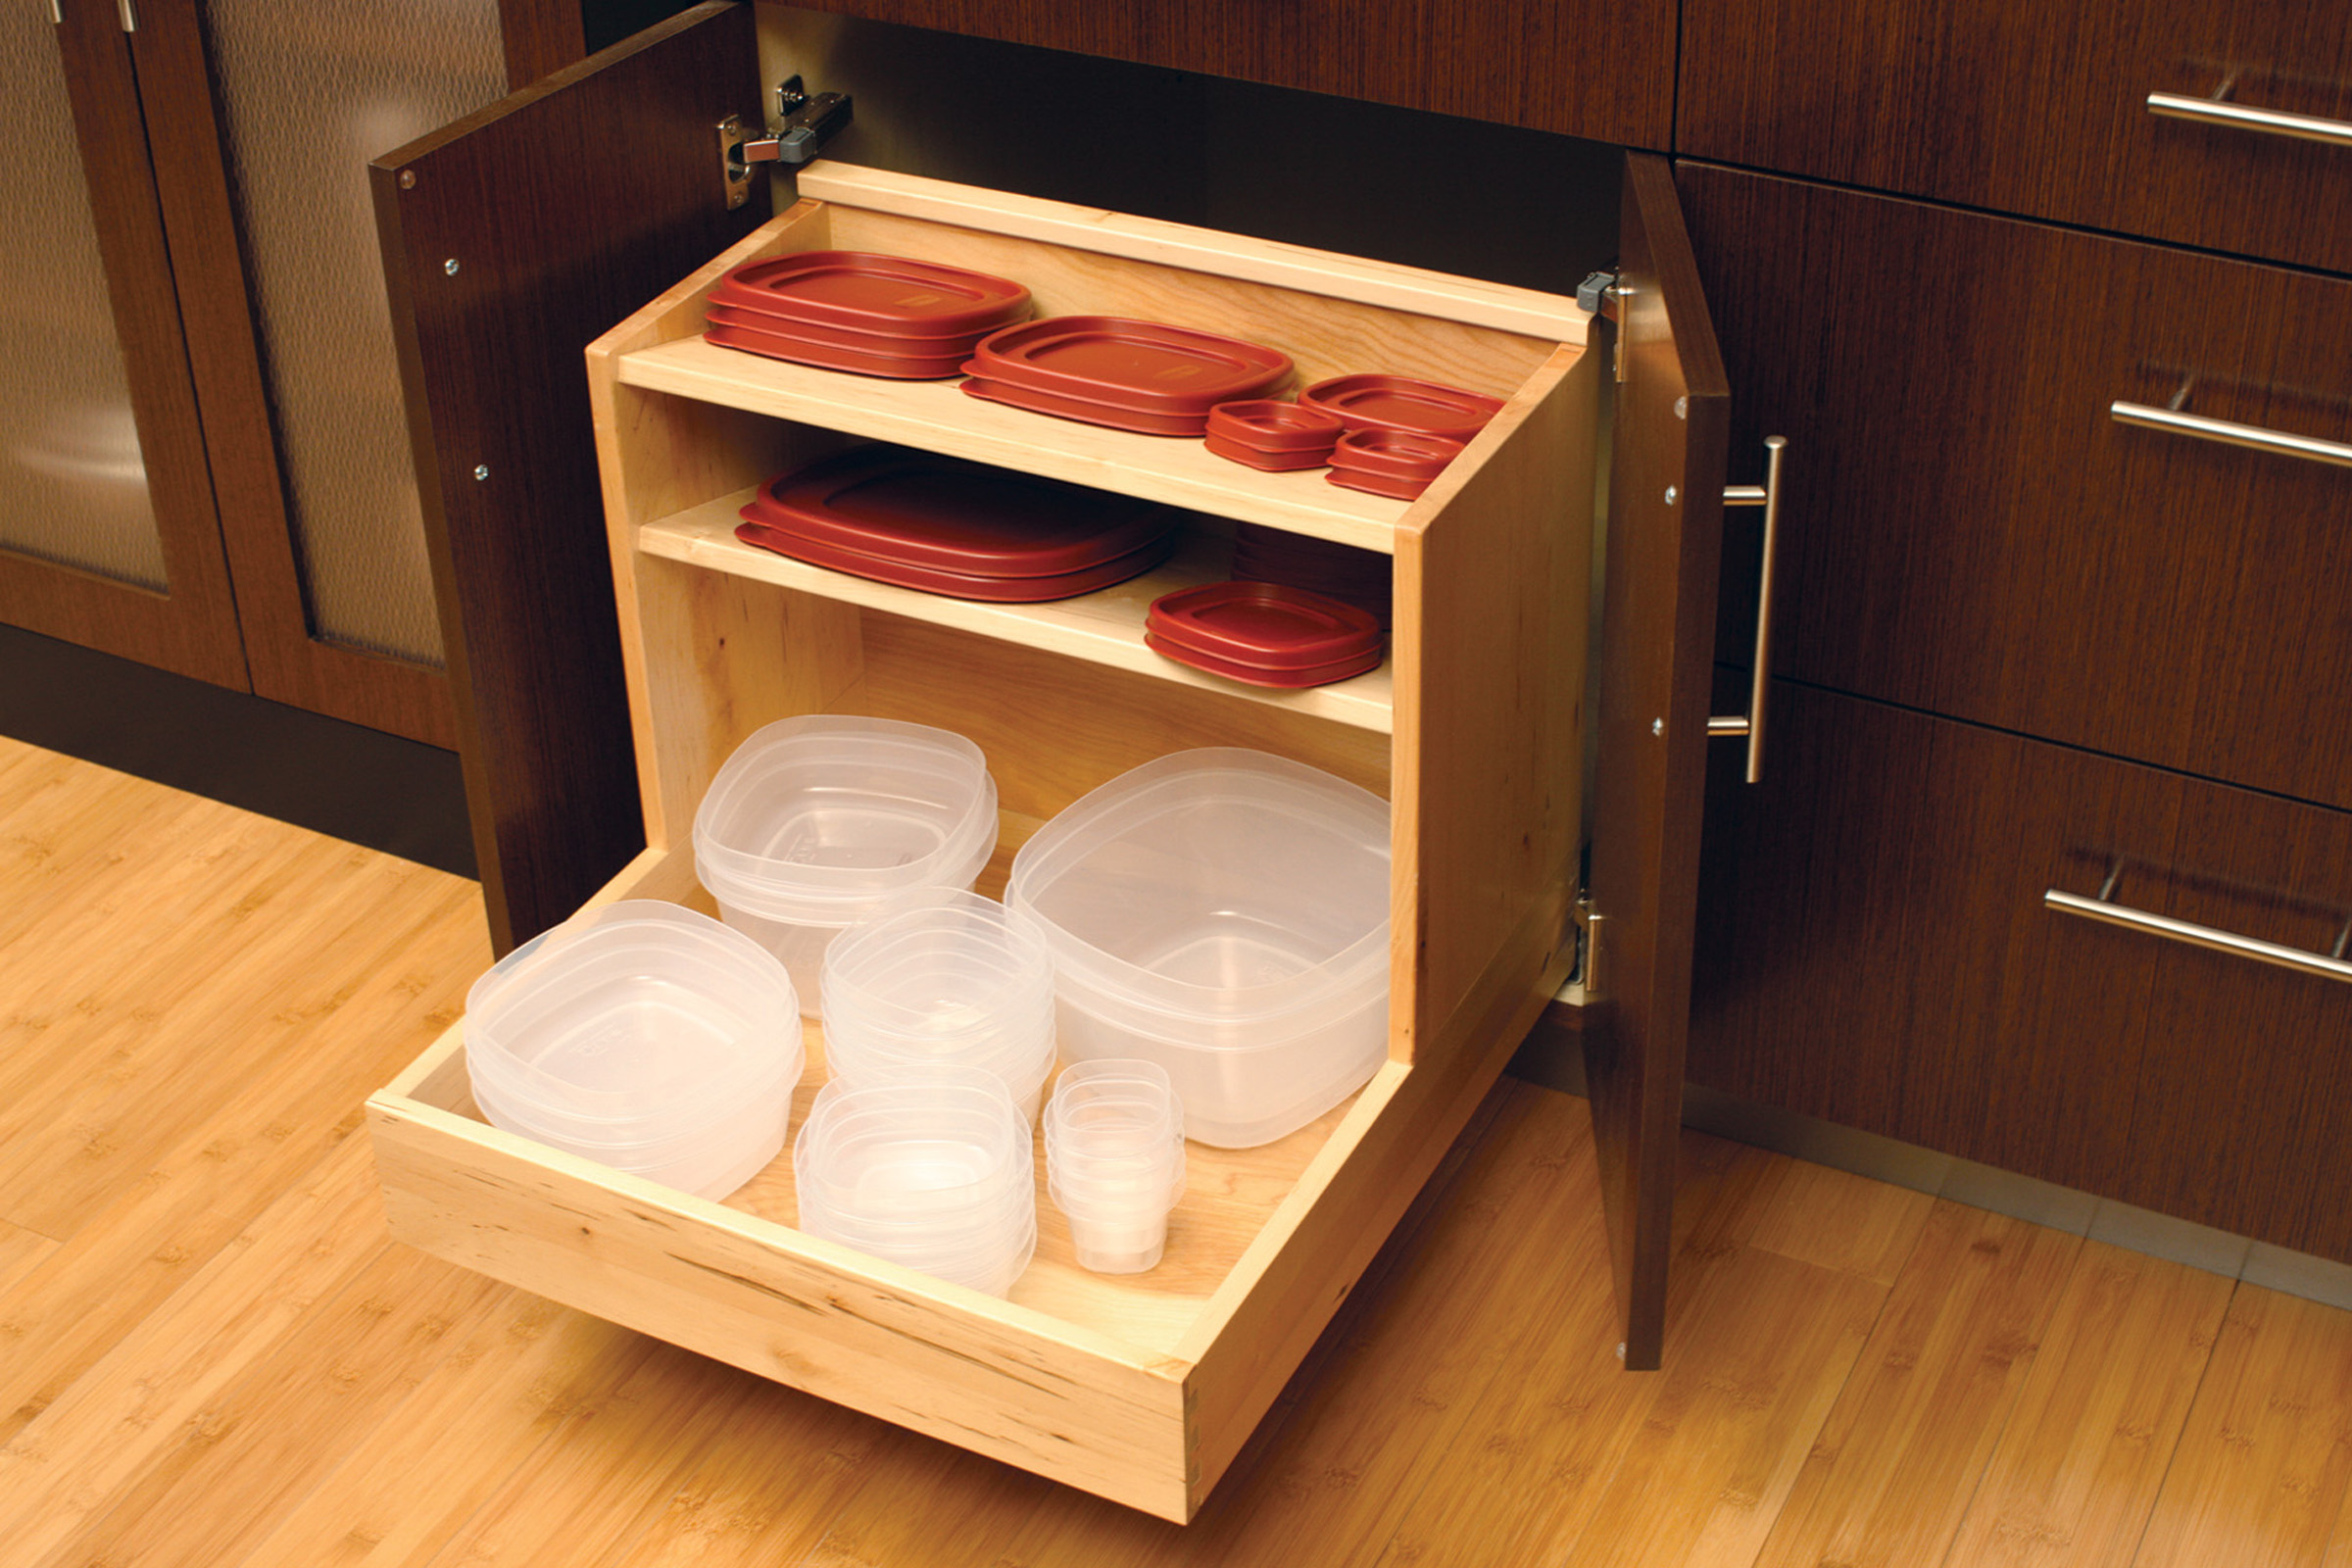 Kitchen Cabinet Storage: More in Your Drawer! - Dura Supreme Cabinetry